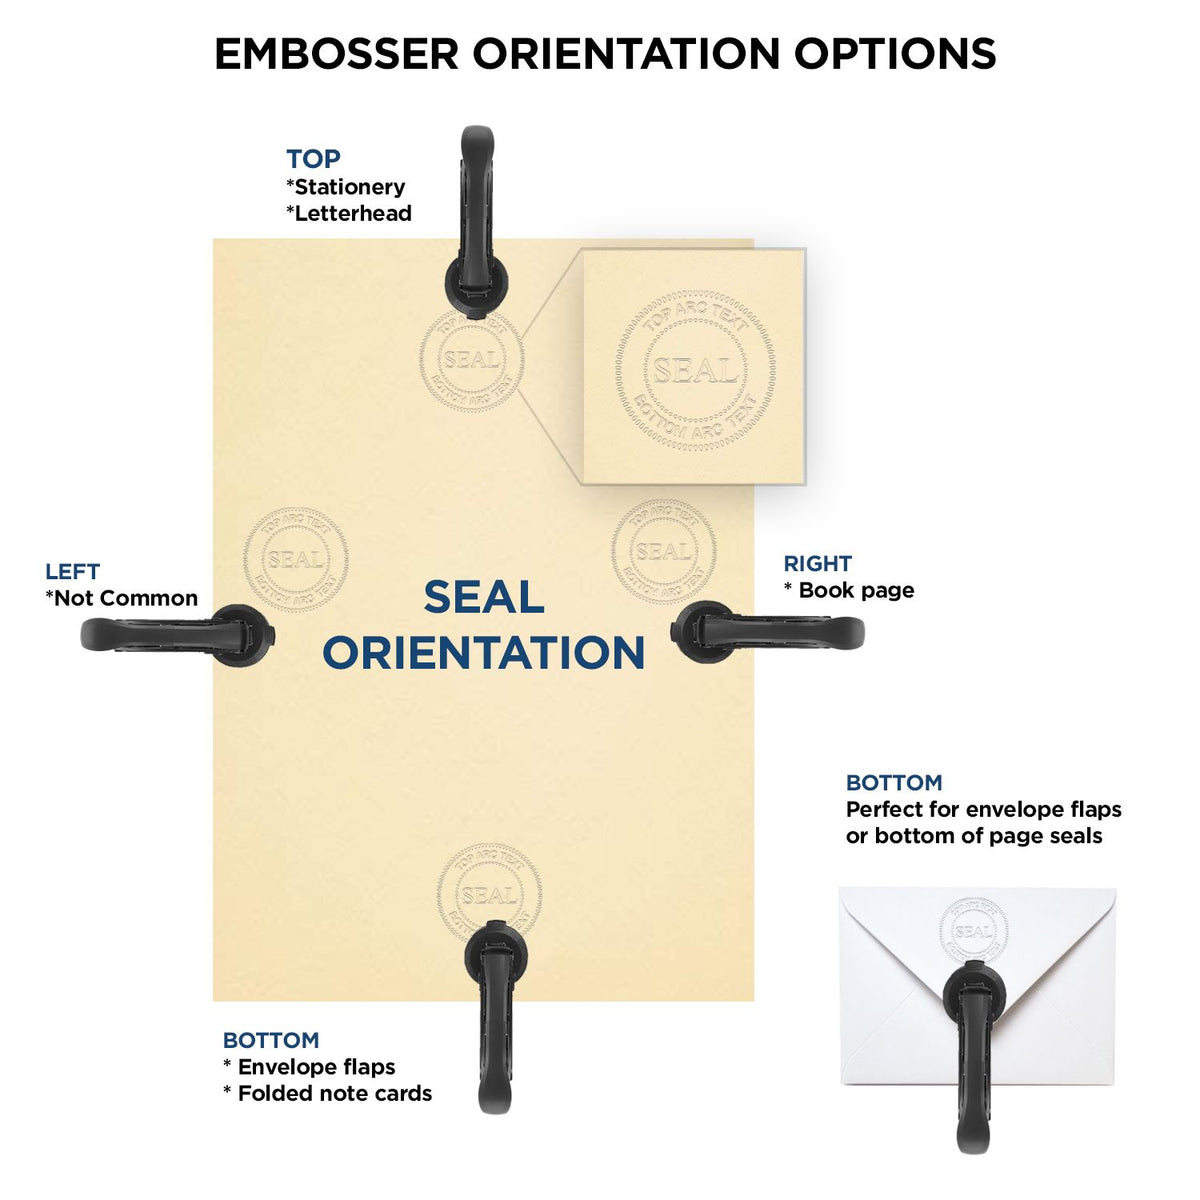 An infographic for the Heavy Duty Cast Iron Delaware Architect Embosser showing embosser orientation, this is showing examples of a top, bottom, right and left insert.